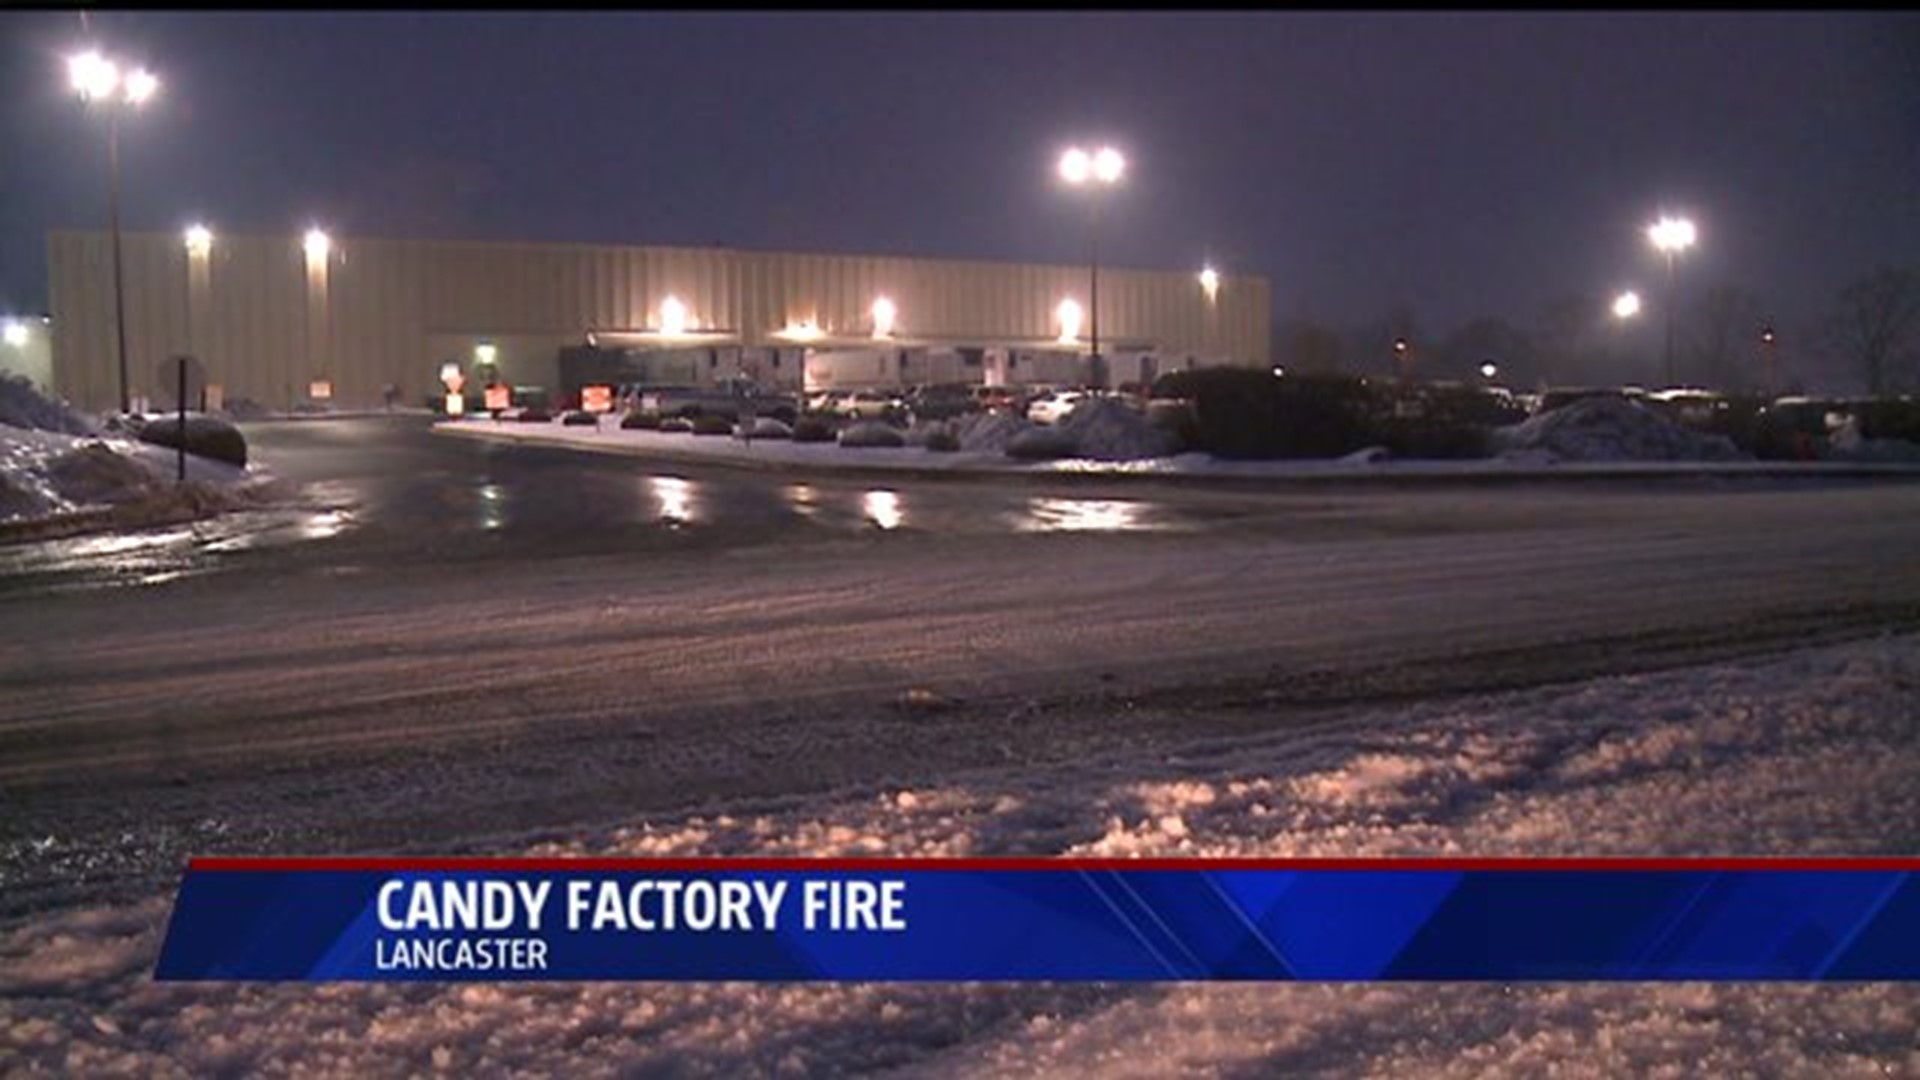 Candy factory fire